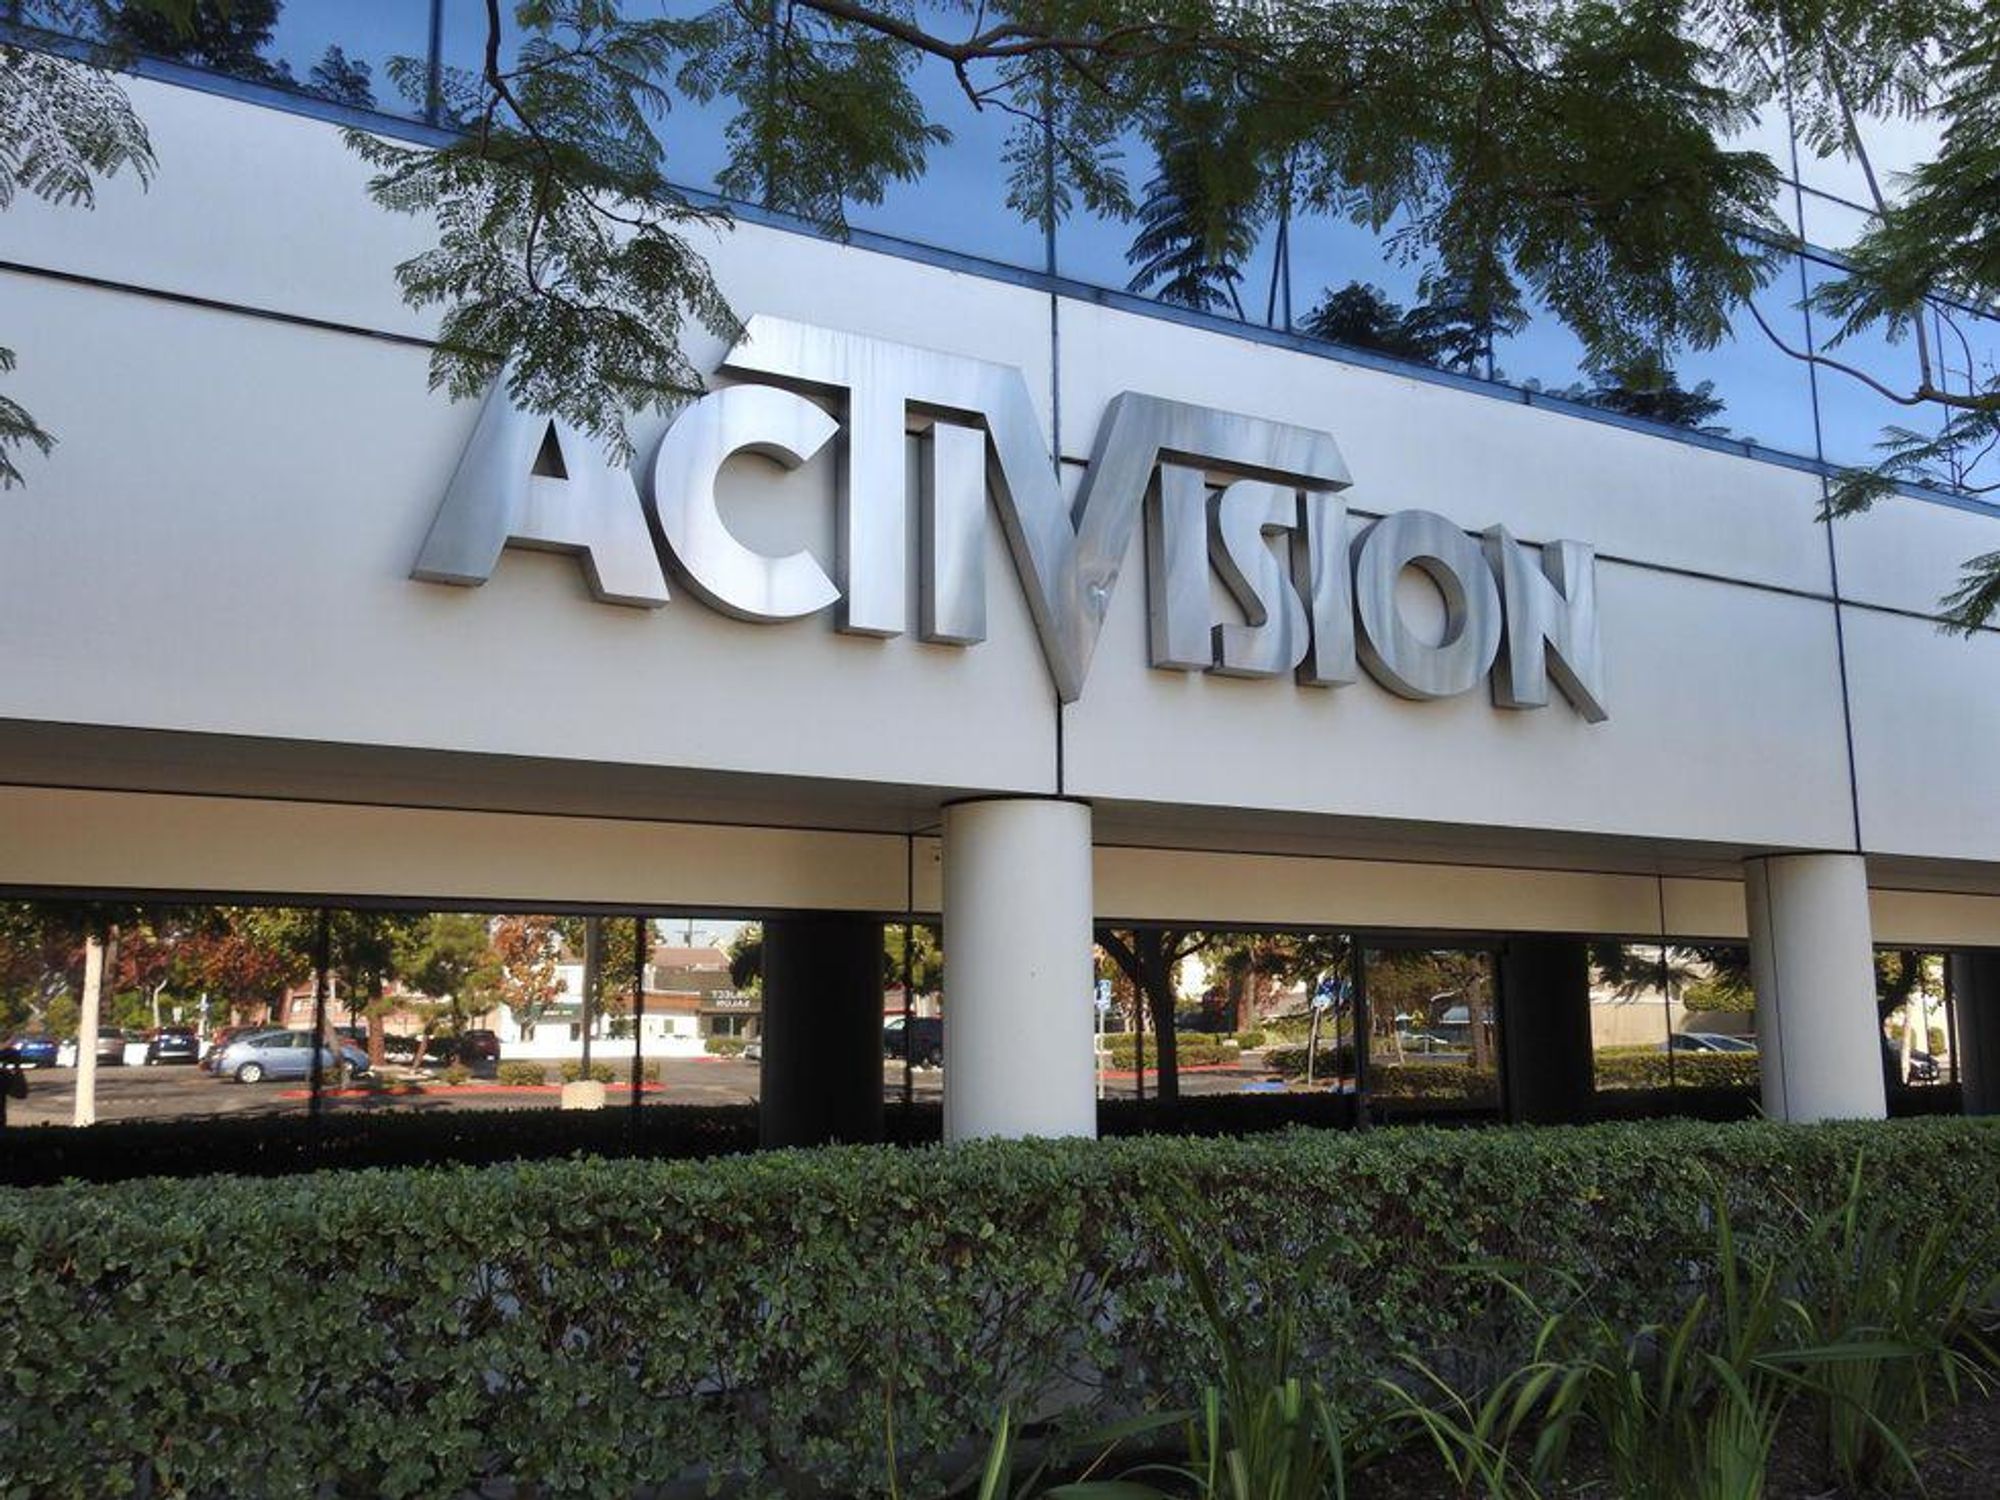 Activision to pay $50 mln to settle workplace discrimination lawsuit